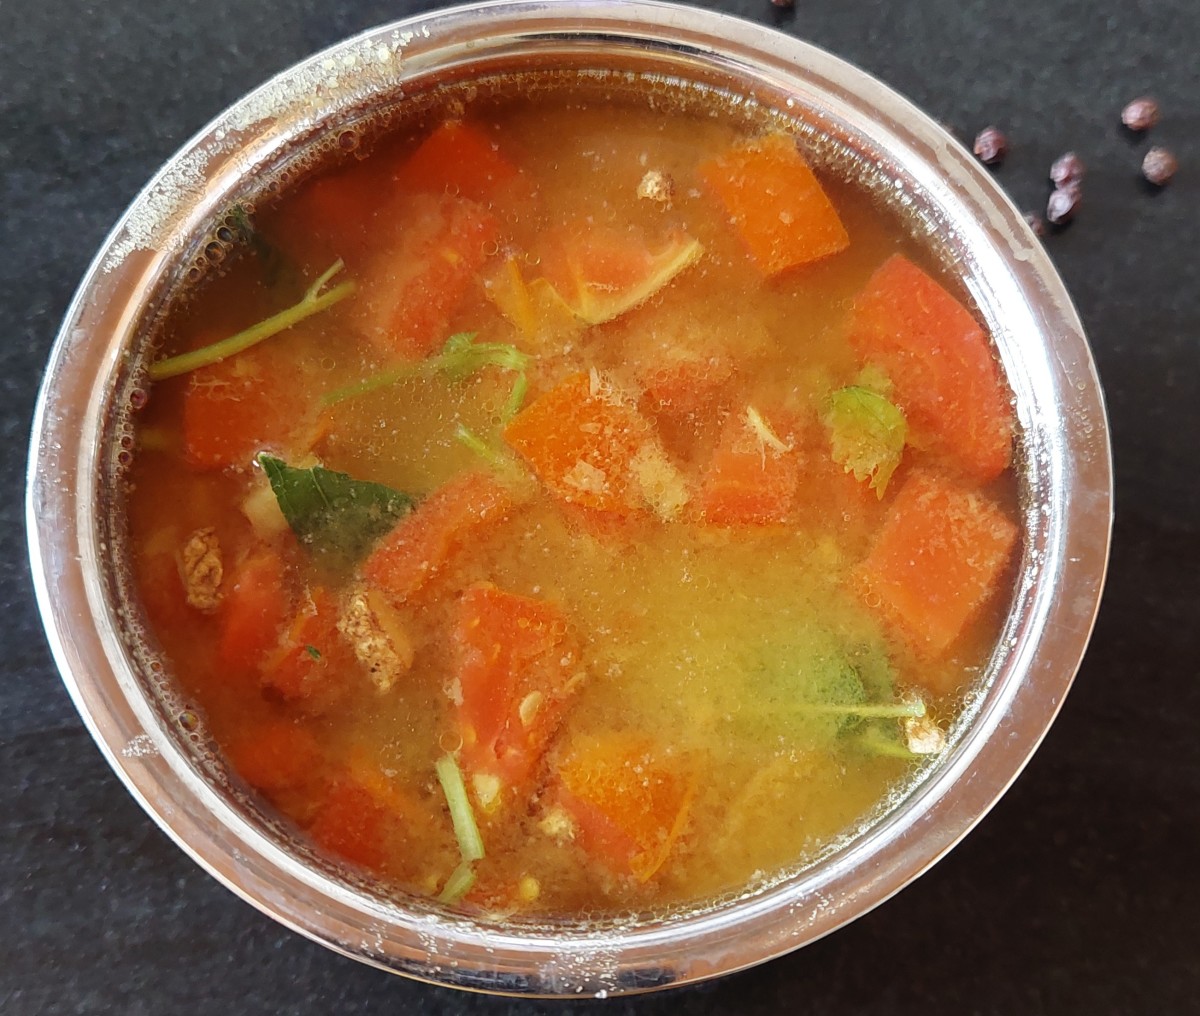 Serve this lip-smacking rasam with rice or have as a soup.